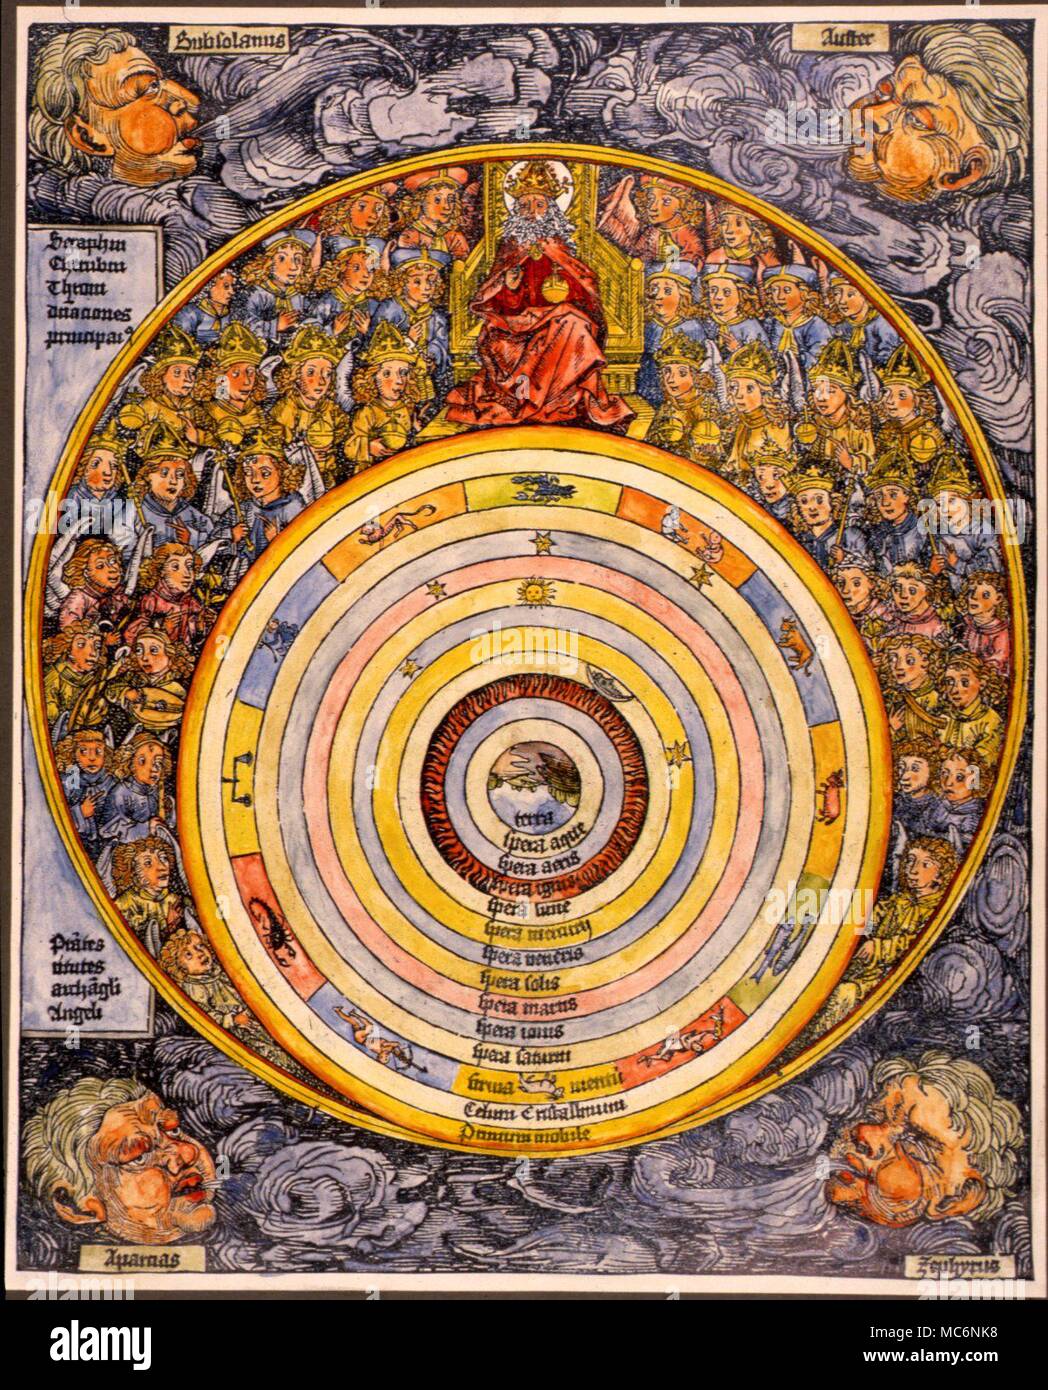 There are remarkable similarities in the numerologies of the Jewish Cabbala and the Christian world-system. Here we see the nine celestial hierarchies, linked traditionally with he planets, overseen by the Godhead. The four winds, visible in the corners, carry the planetary and celestial influences to the earth, and there is good reason for linking the four winds with the Four Worlds of the Cabbalists. Sixteenth century woodprint, in the collection of Charles Walker. Stock Photo